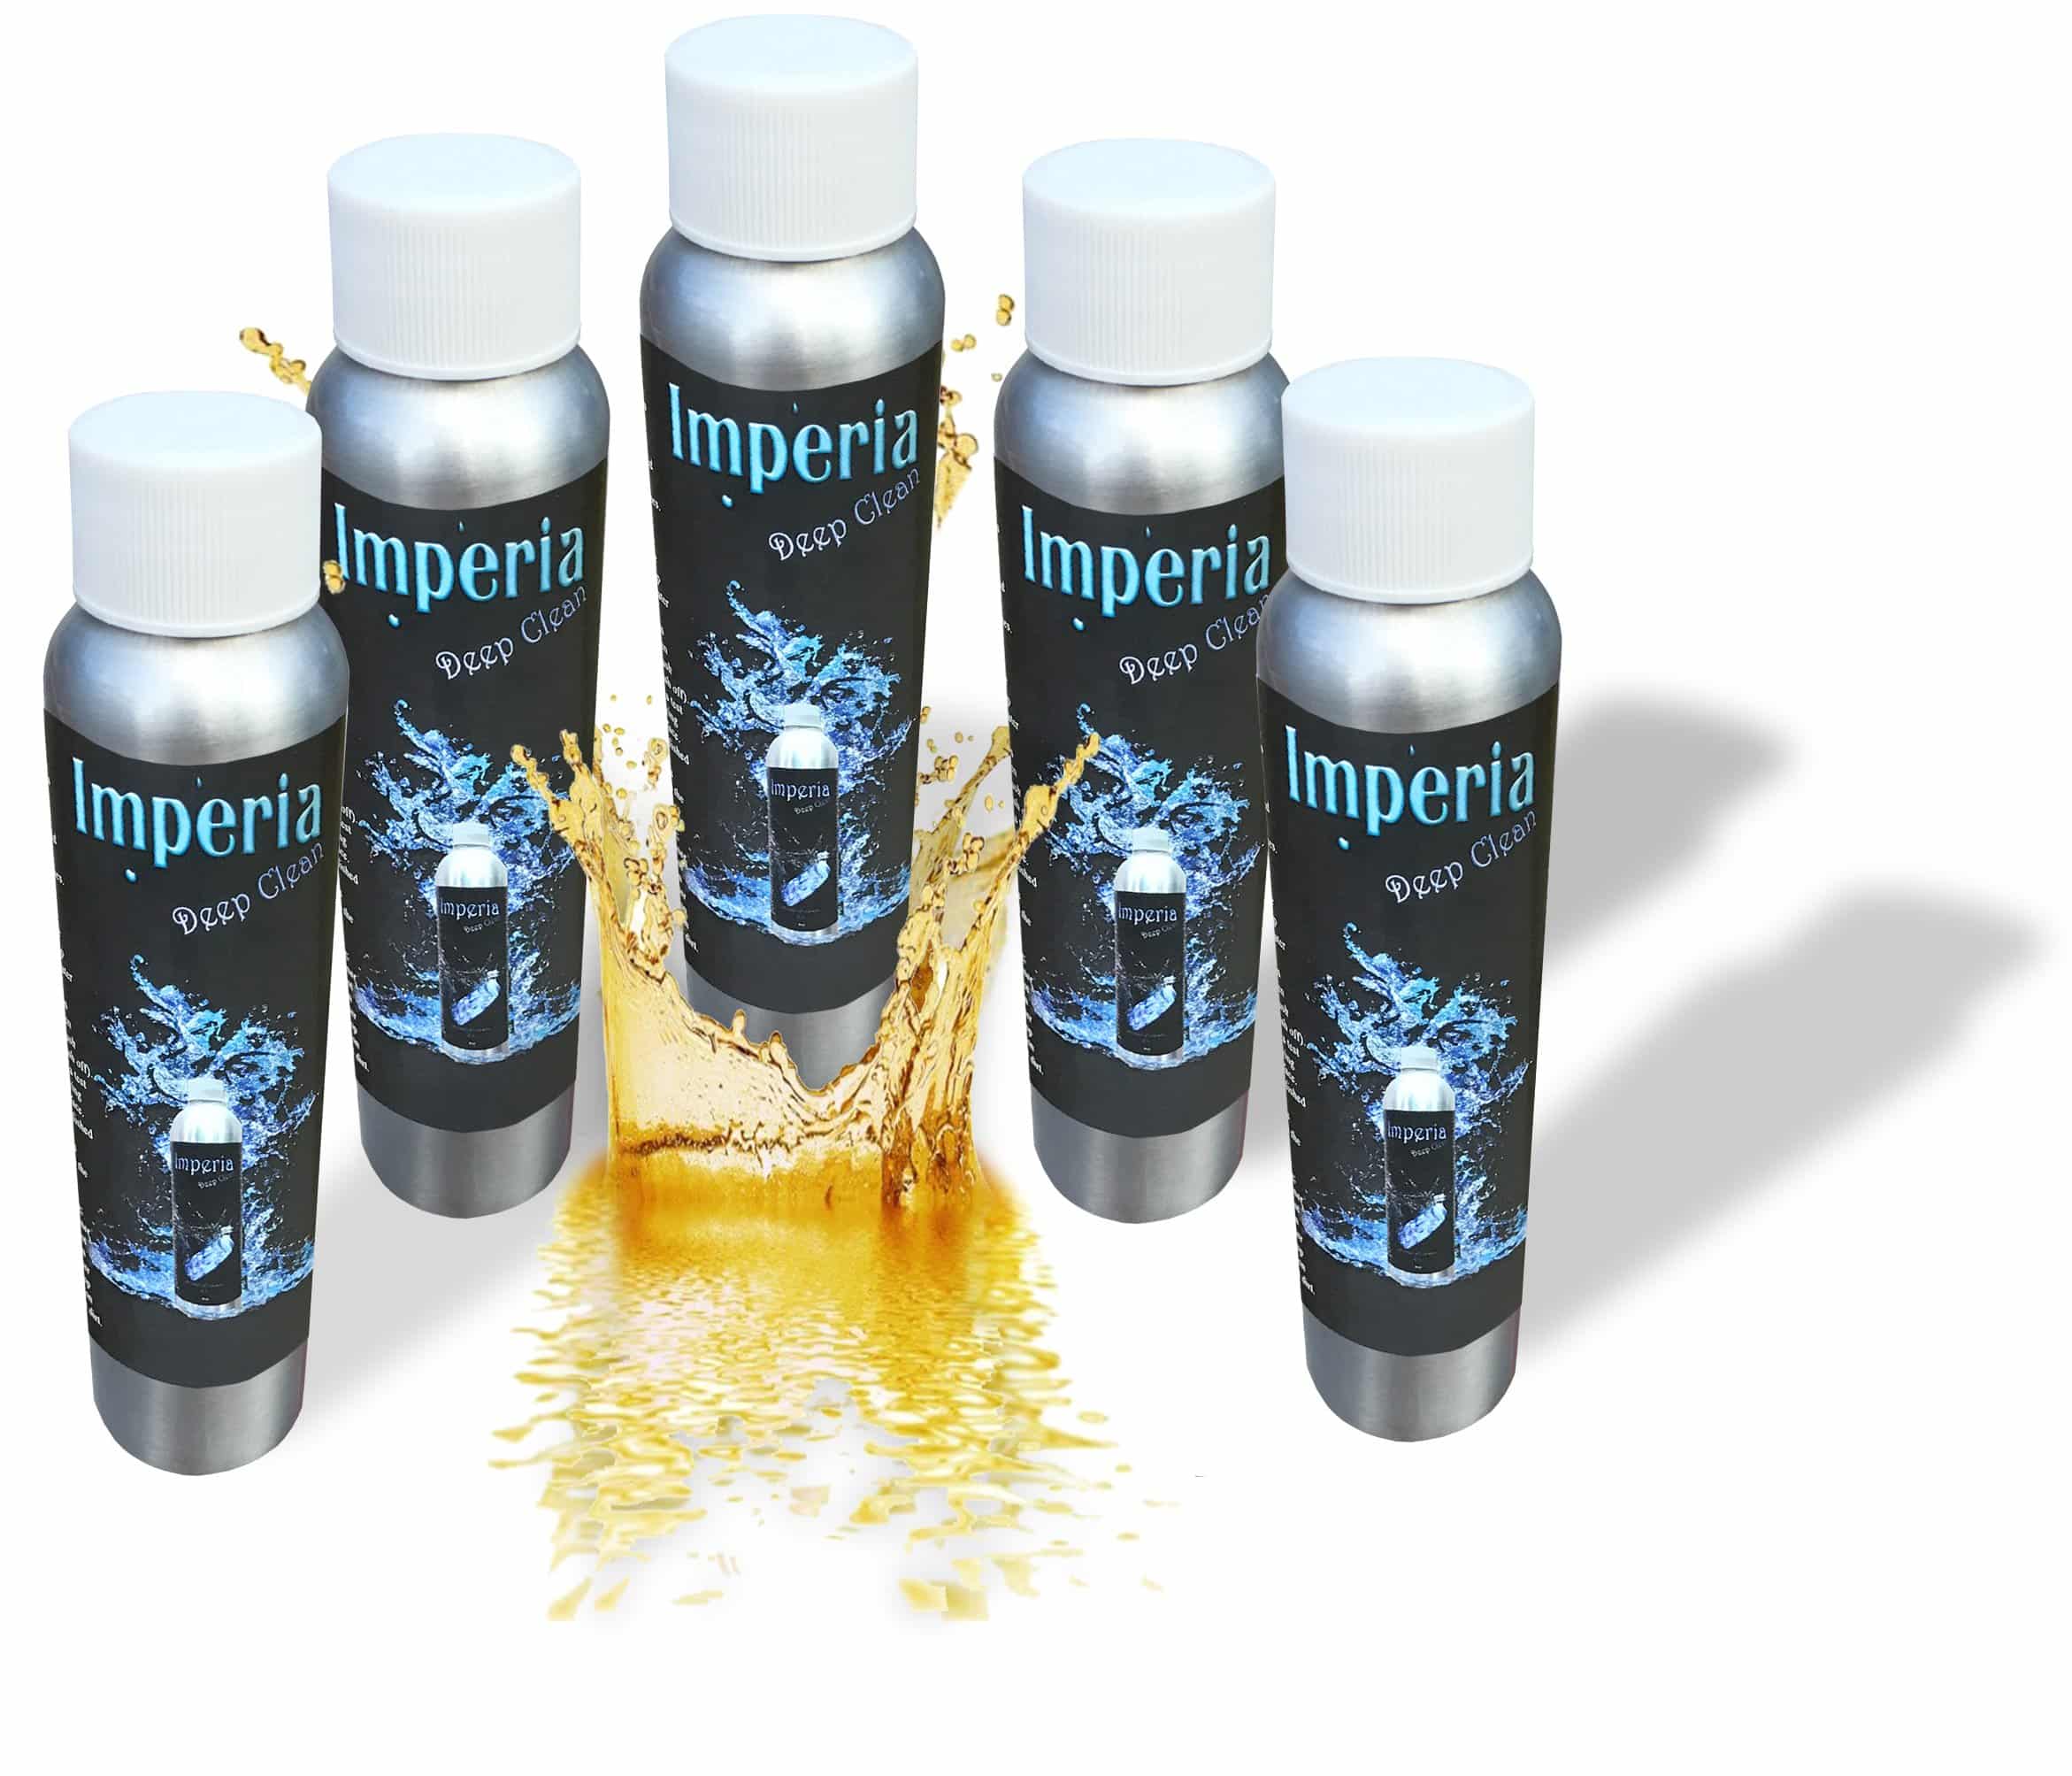 Imperia Deep Clean - An Incredible Floor Grout Tile Cleaning Product